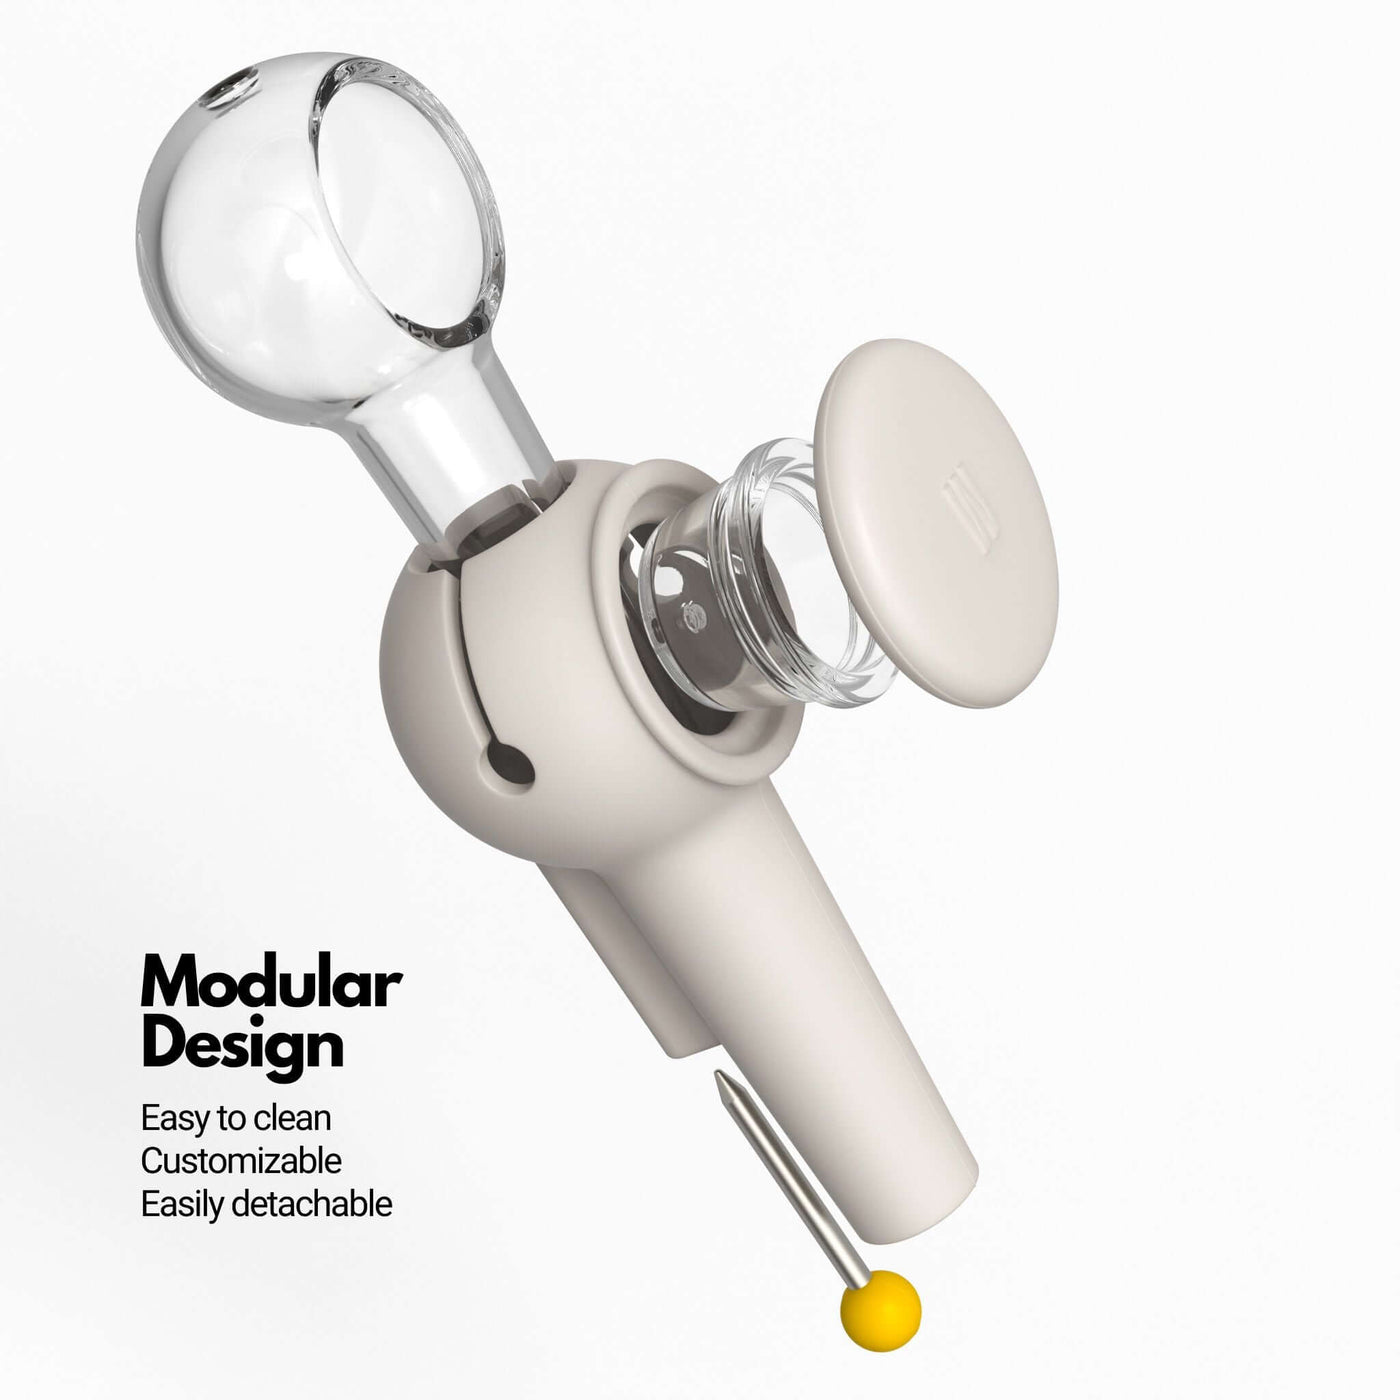 Exploded view infographic of Weeday spoon pipe (in cream white color), highlighting its customizable and detachable features.